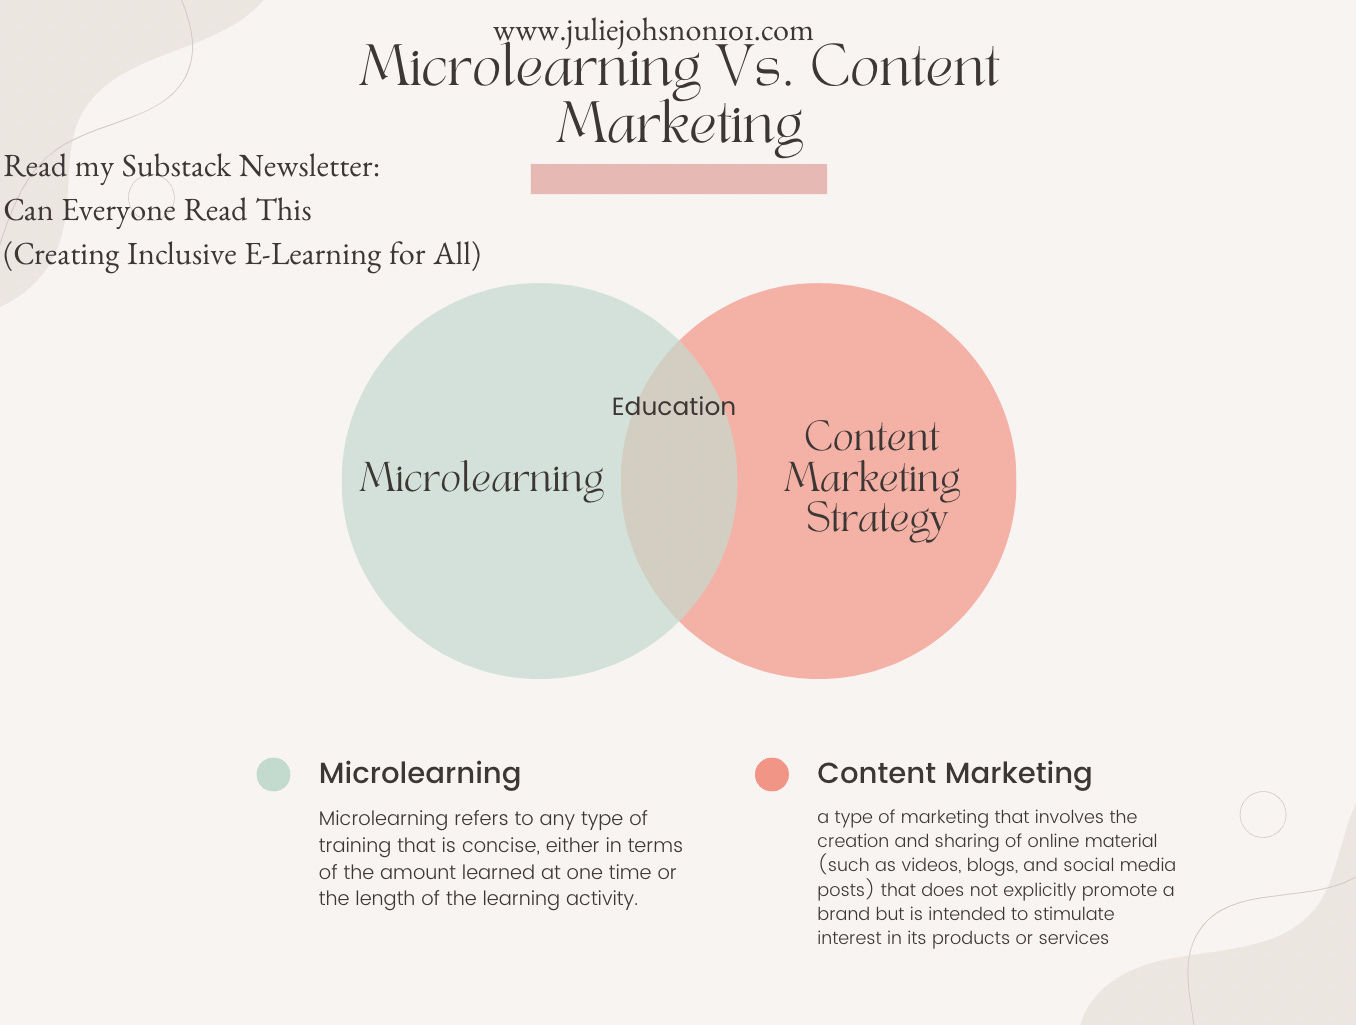 two circles merging together to form a venndiagram. The words Micolearning are in the far left hand side and content marketing strategy is in the far right.  The word education is at the space where the two cirlces intertwine